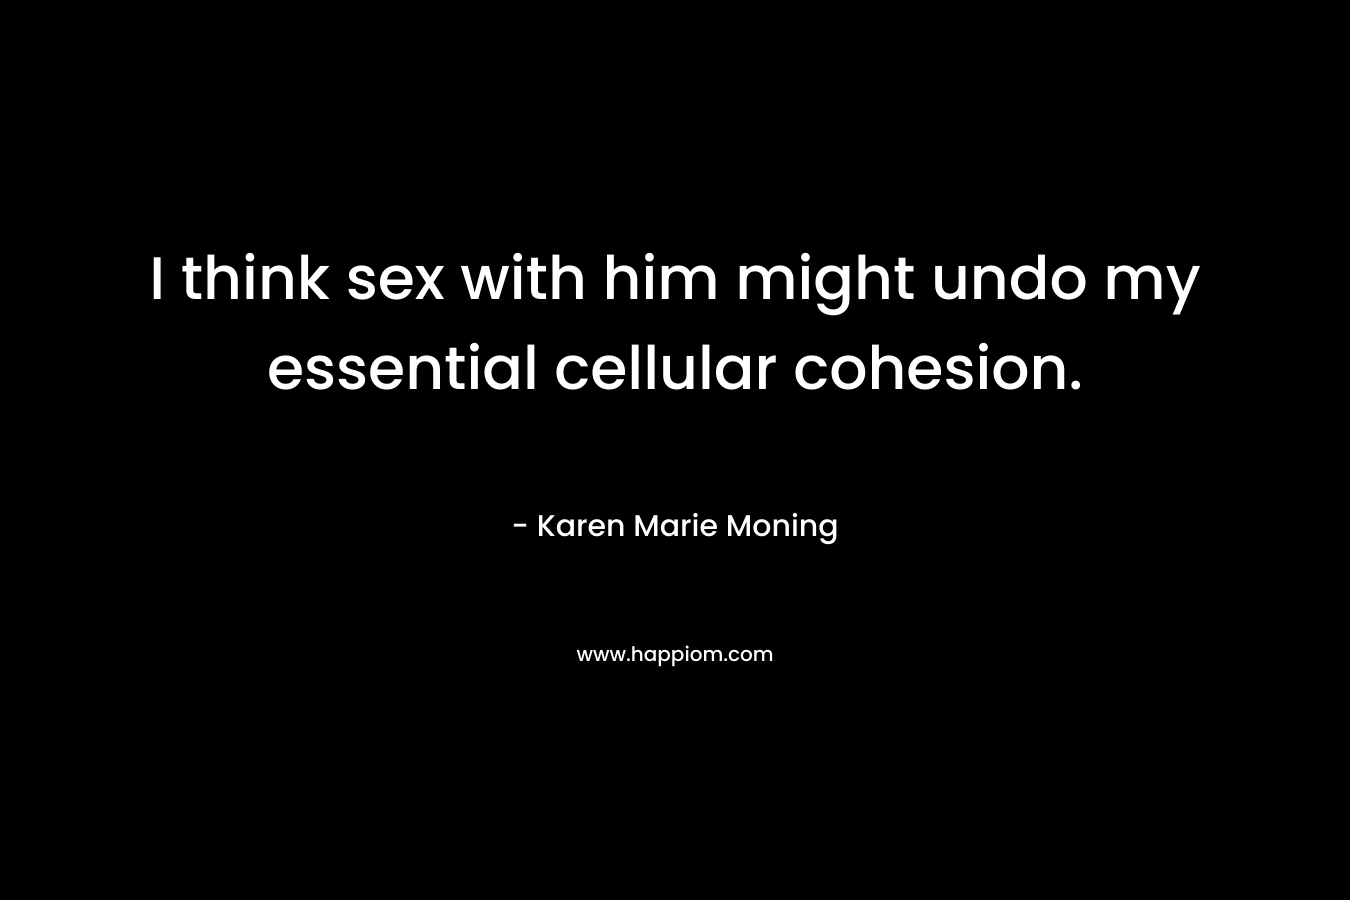 I think sex with him might undo my essential cellular cohesion. – Karen Marie Moning